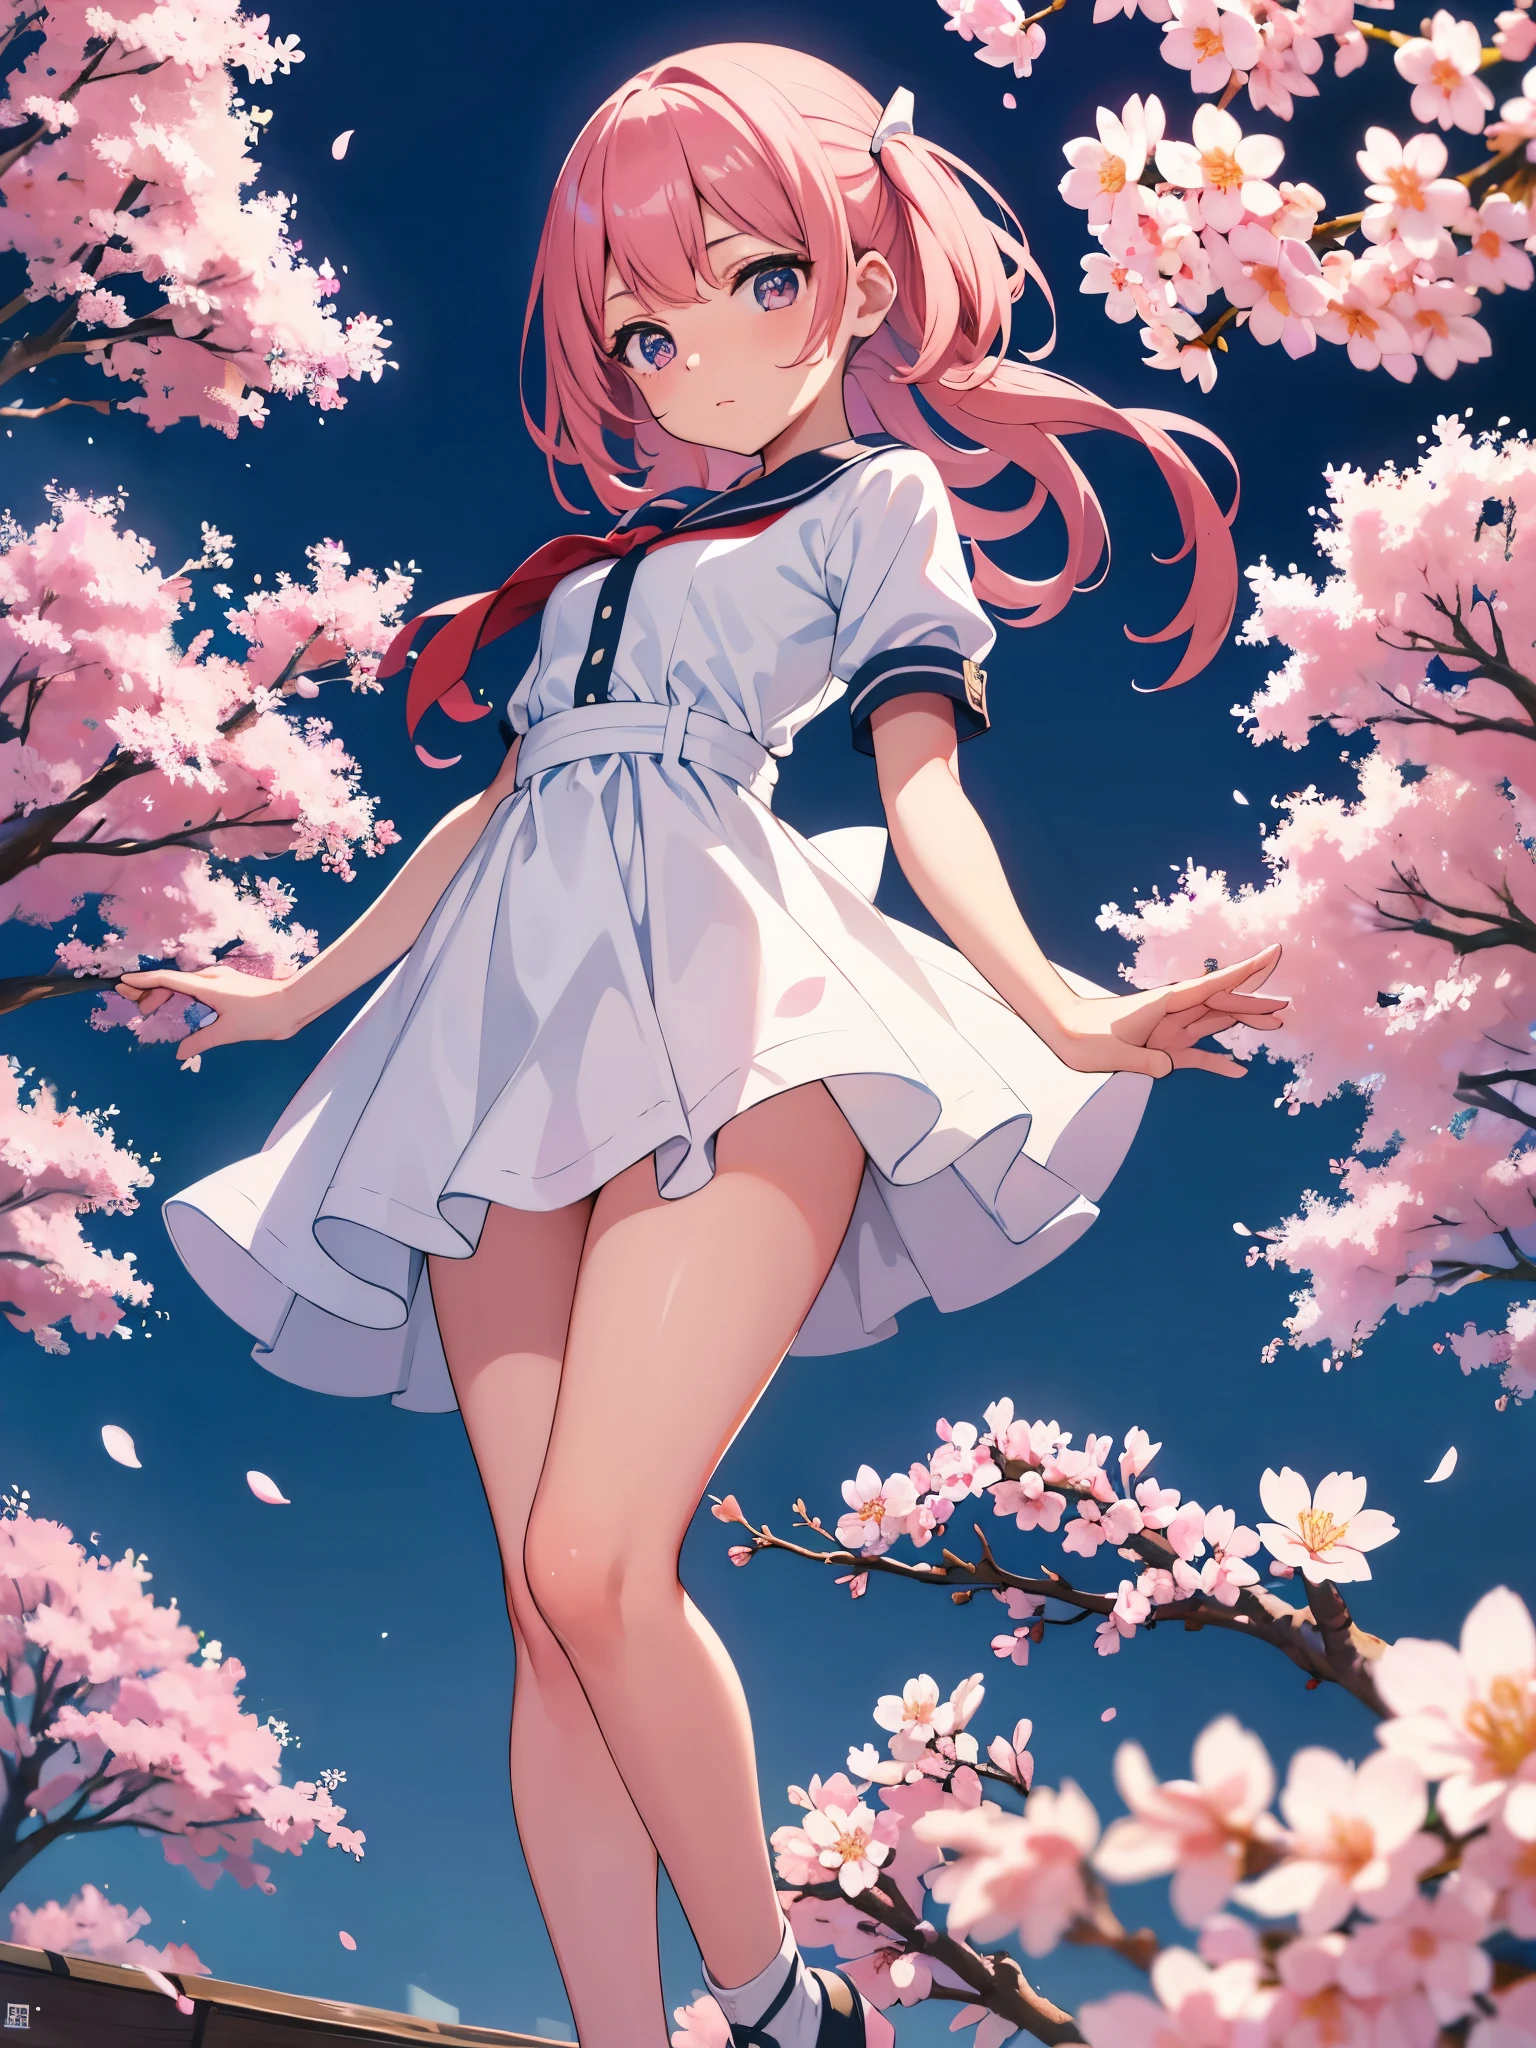 Rows of cherry blossoms in the park　Cherry blossoms in full bloom　Elementary school girl　8 years　flat chest　black fur　wide　The eyes are purple　（（1 person））　Sailor uniform long sleeve white upper body　Navy blue underbody mini skirt　white panties　white socks　sport boots　Lying on the grass under the cherry tree　Sakura petals are dancing.　Look for　Raise your knees and spread your legs a little.（（I can see white panties））　Dynamic Angle　low angle